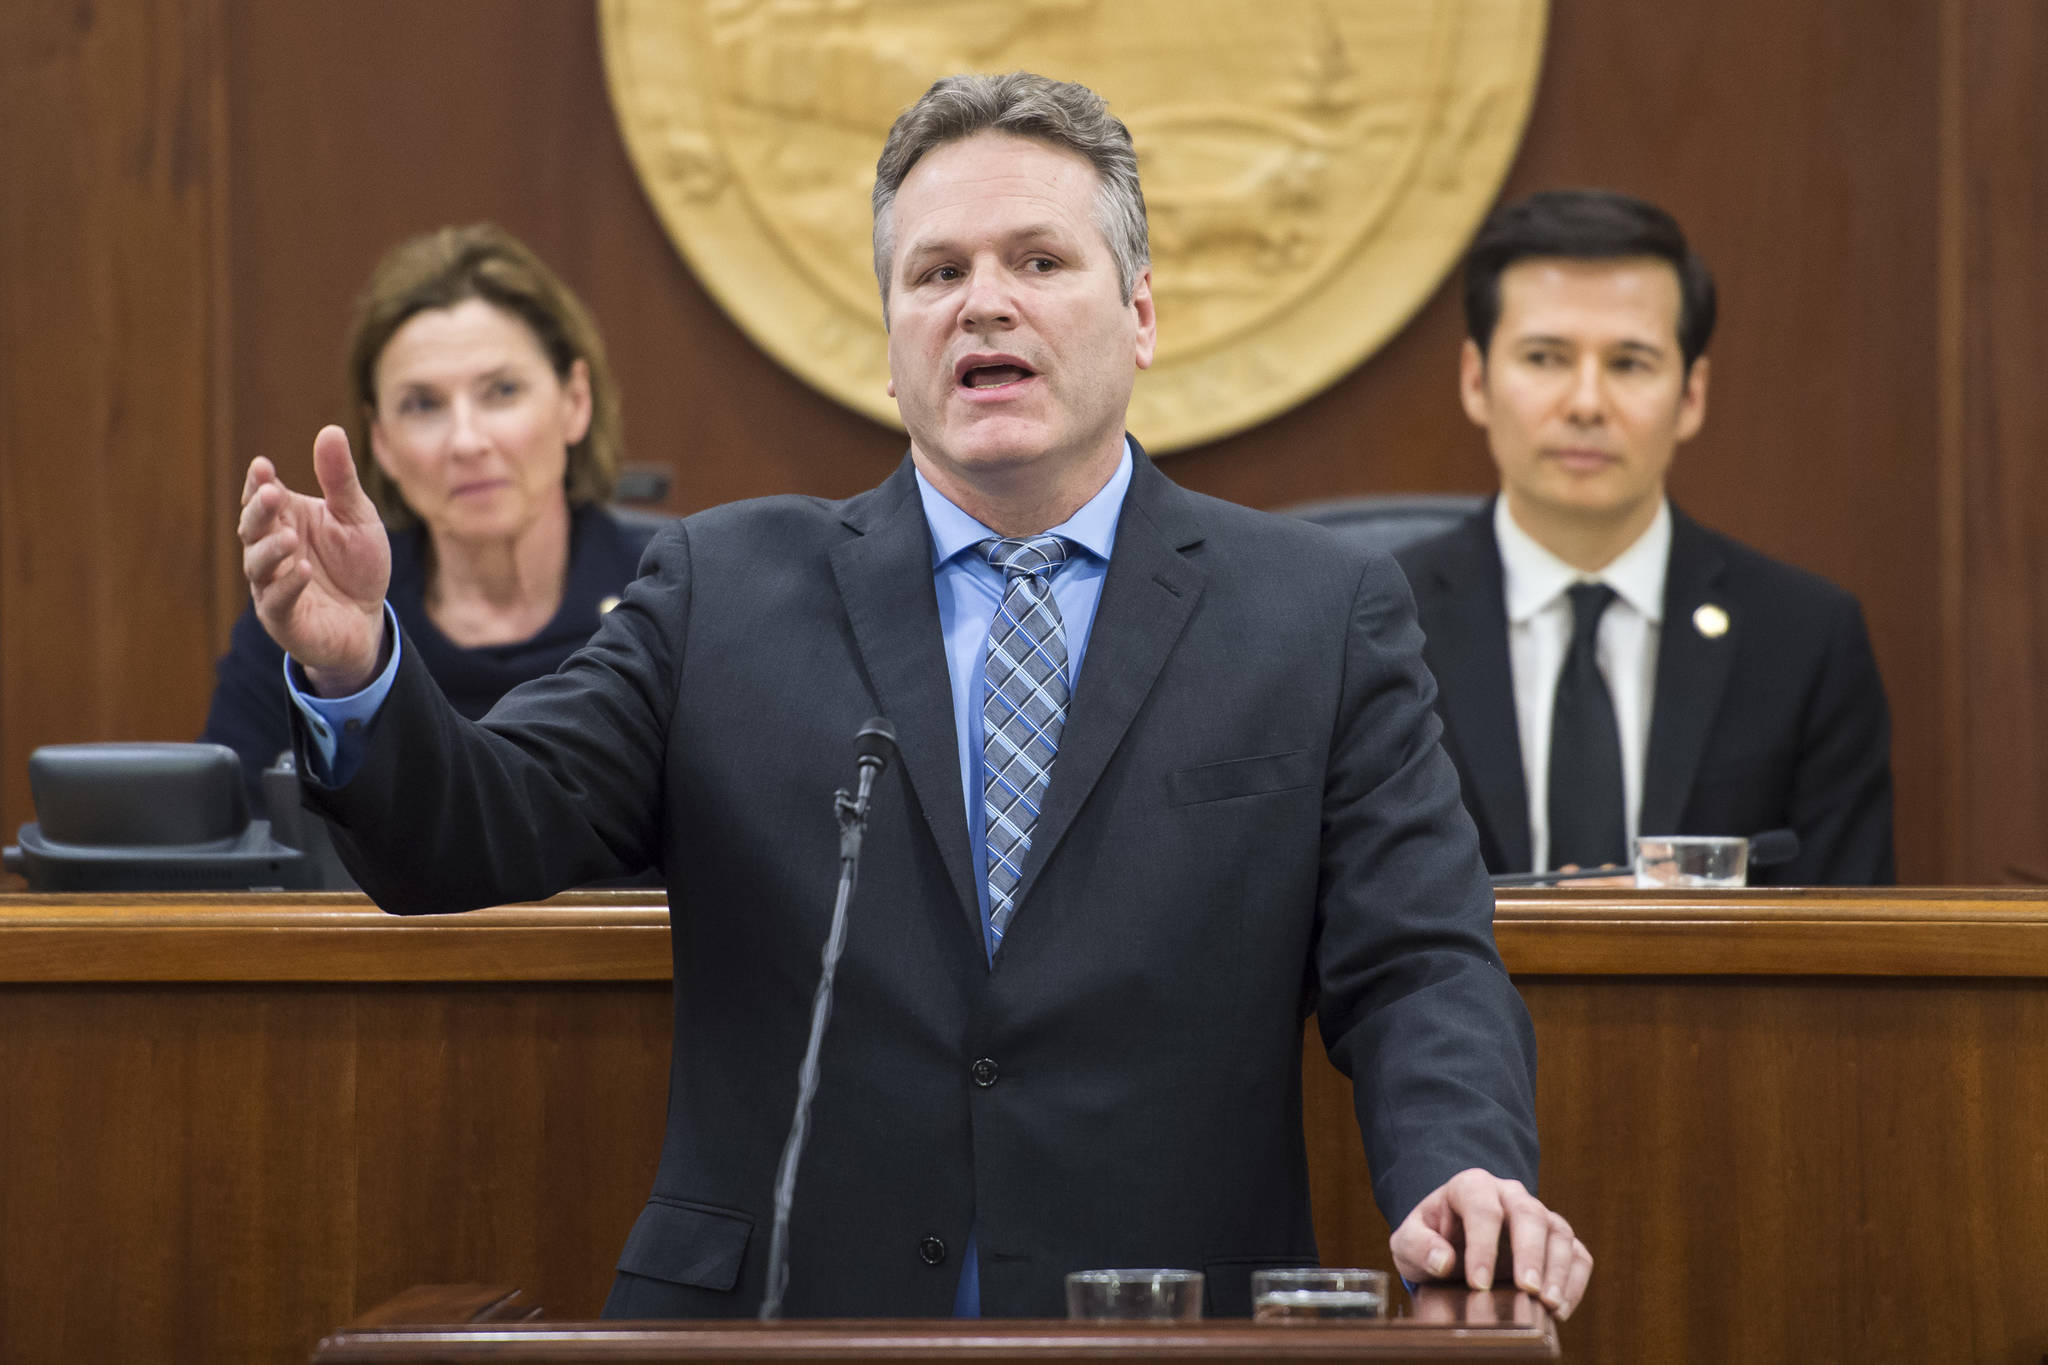 Gov. Mike Dunleavy gives his State of the State speech to a Joint Session of the Alaska Legislature in January 2019 at the Alaska State Capitol. (Michael Penn | Juneau Empire File)